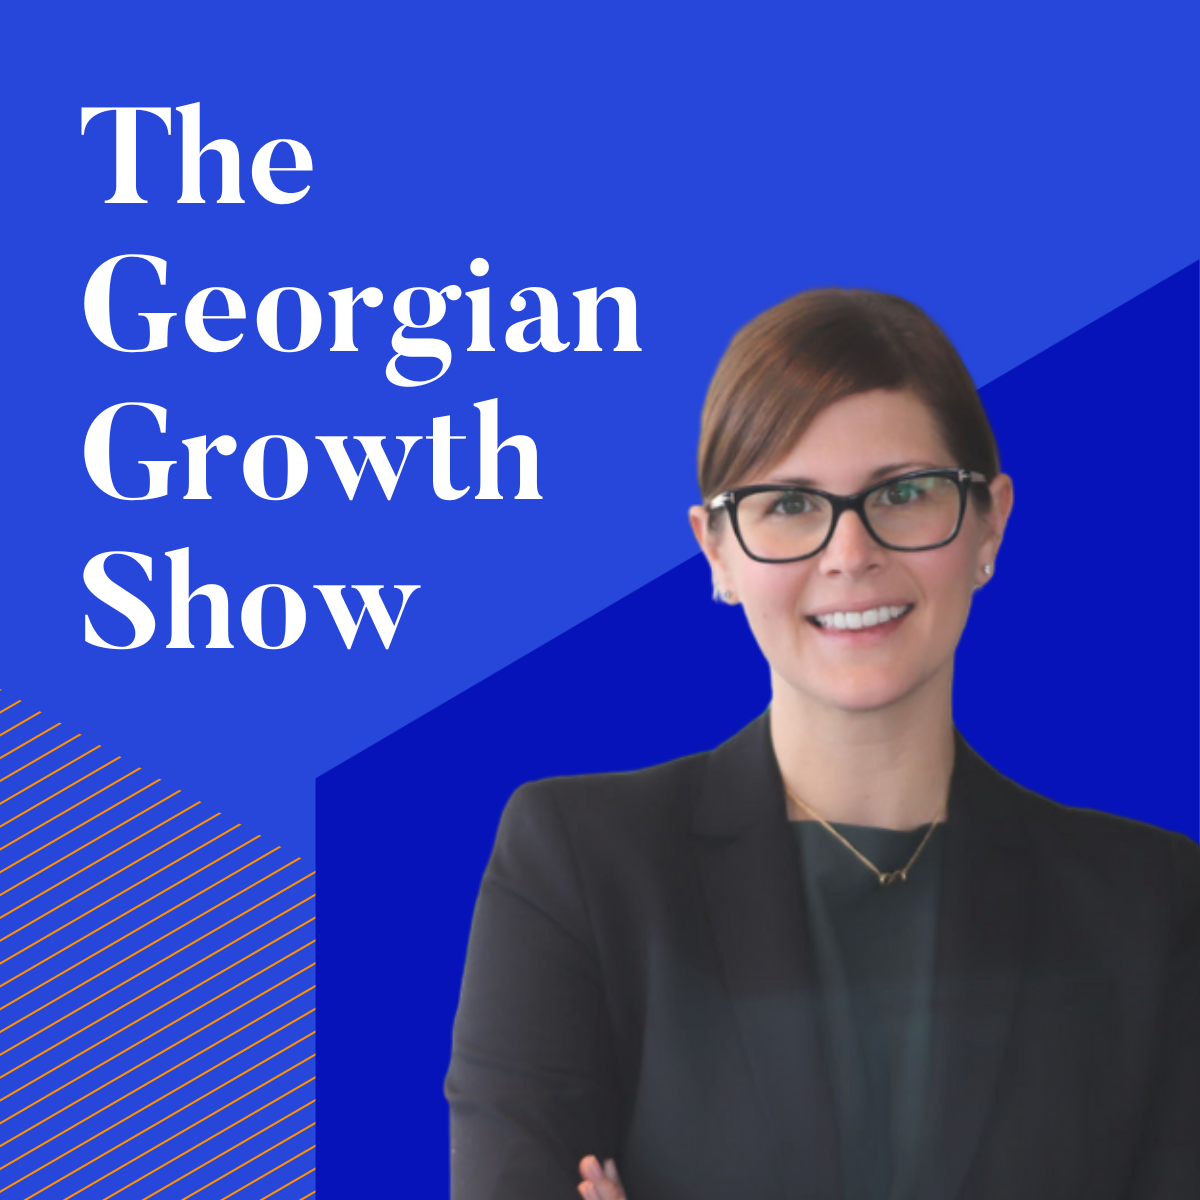 the Georgian growth show graphic with a photo of the guest in the show